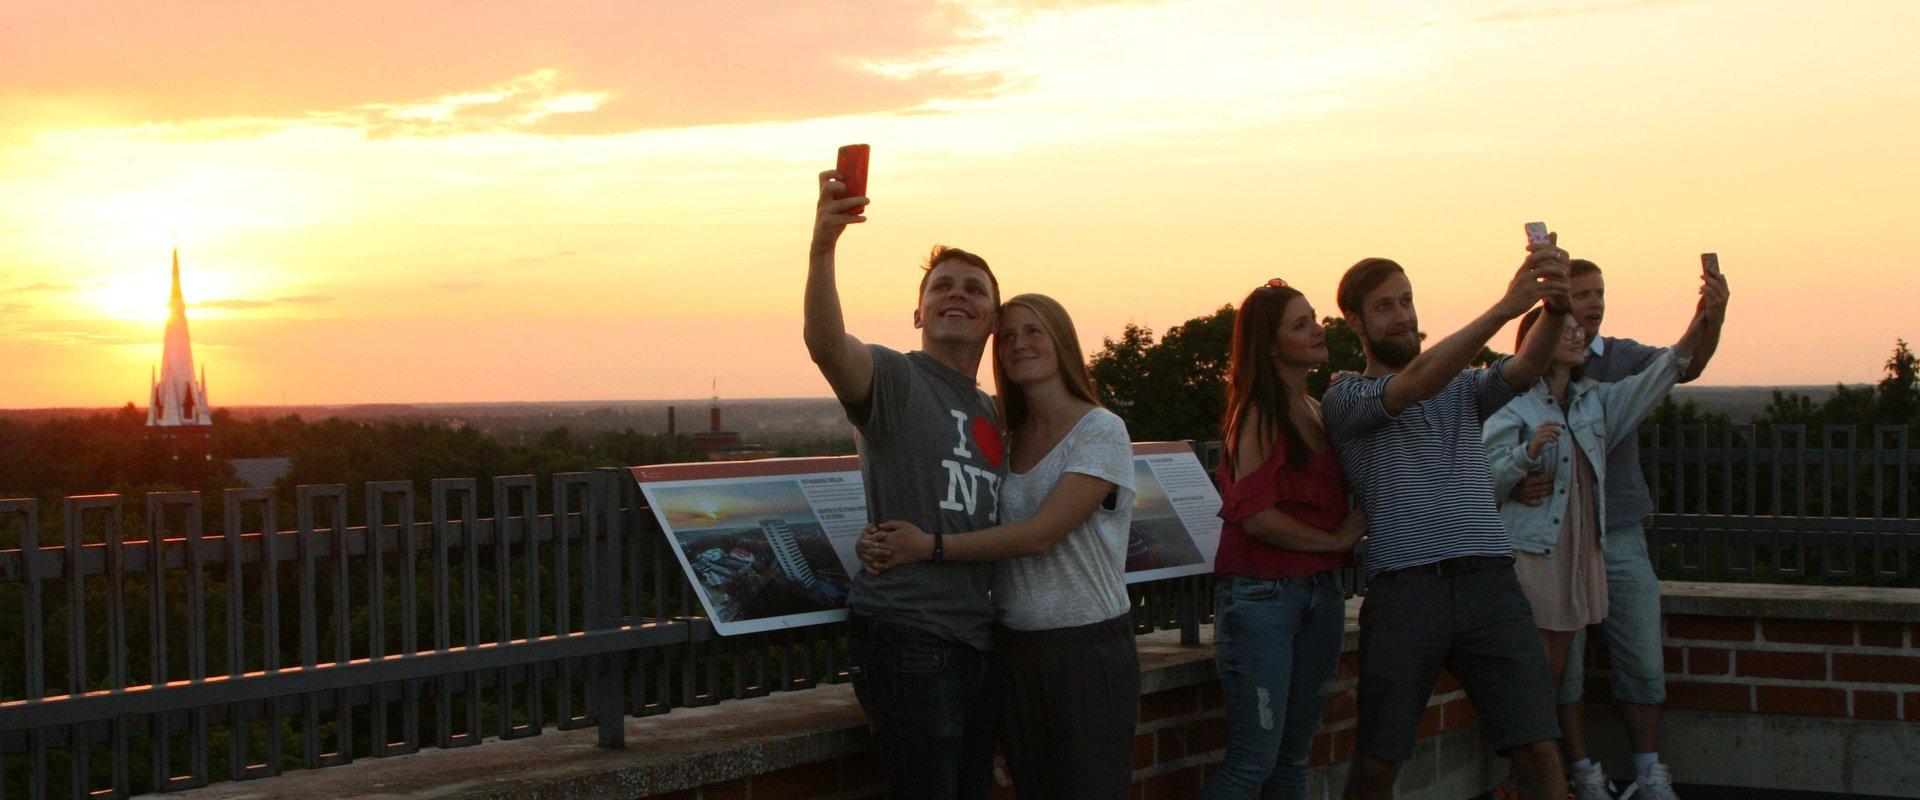 University of Tartu Museum, Cathedral spires, young people taking selfies during sunset